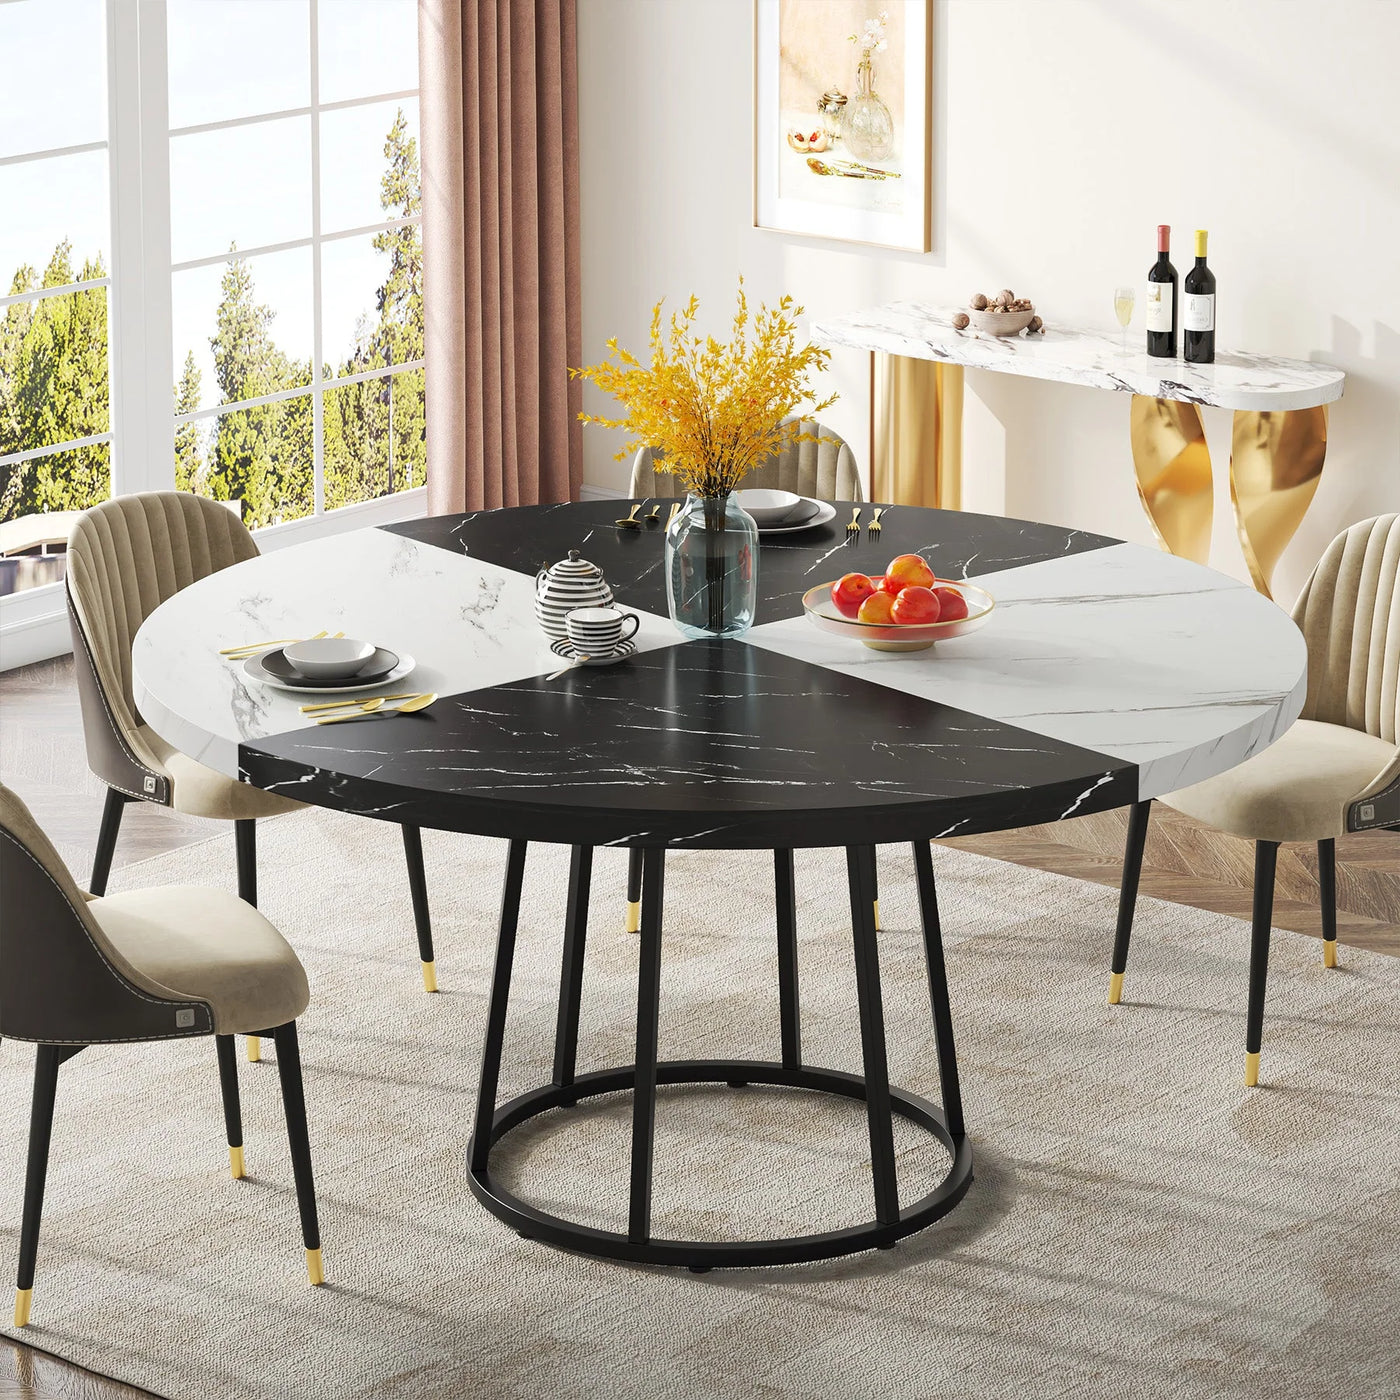 Casper Round Dining Table for 4 People, 47" Kitchen Table with Circle Metal Base